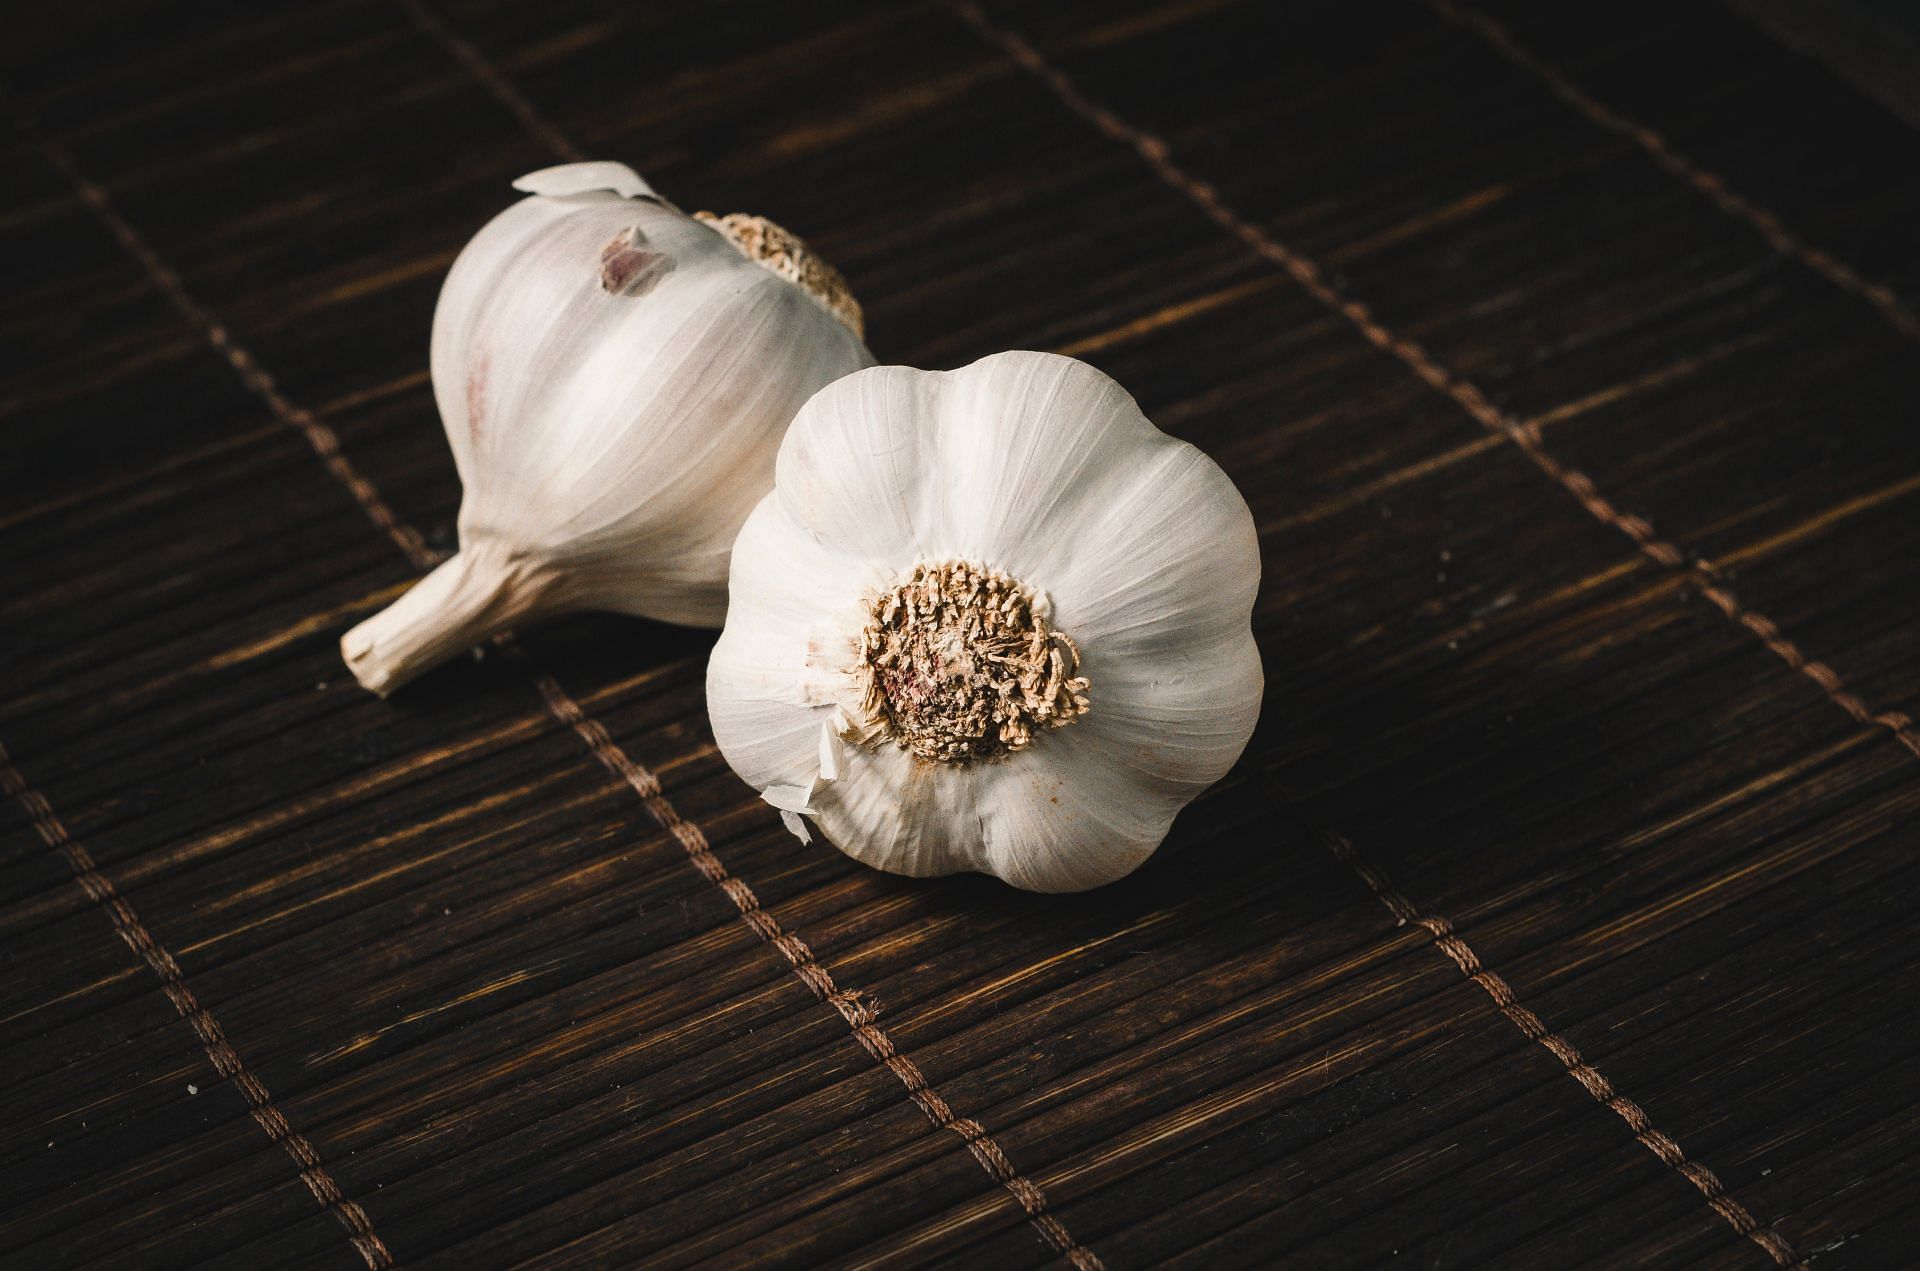 garlic for blood pressure and immunity (image sourced via Pexels / Photo by Isabella)